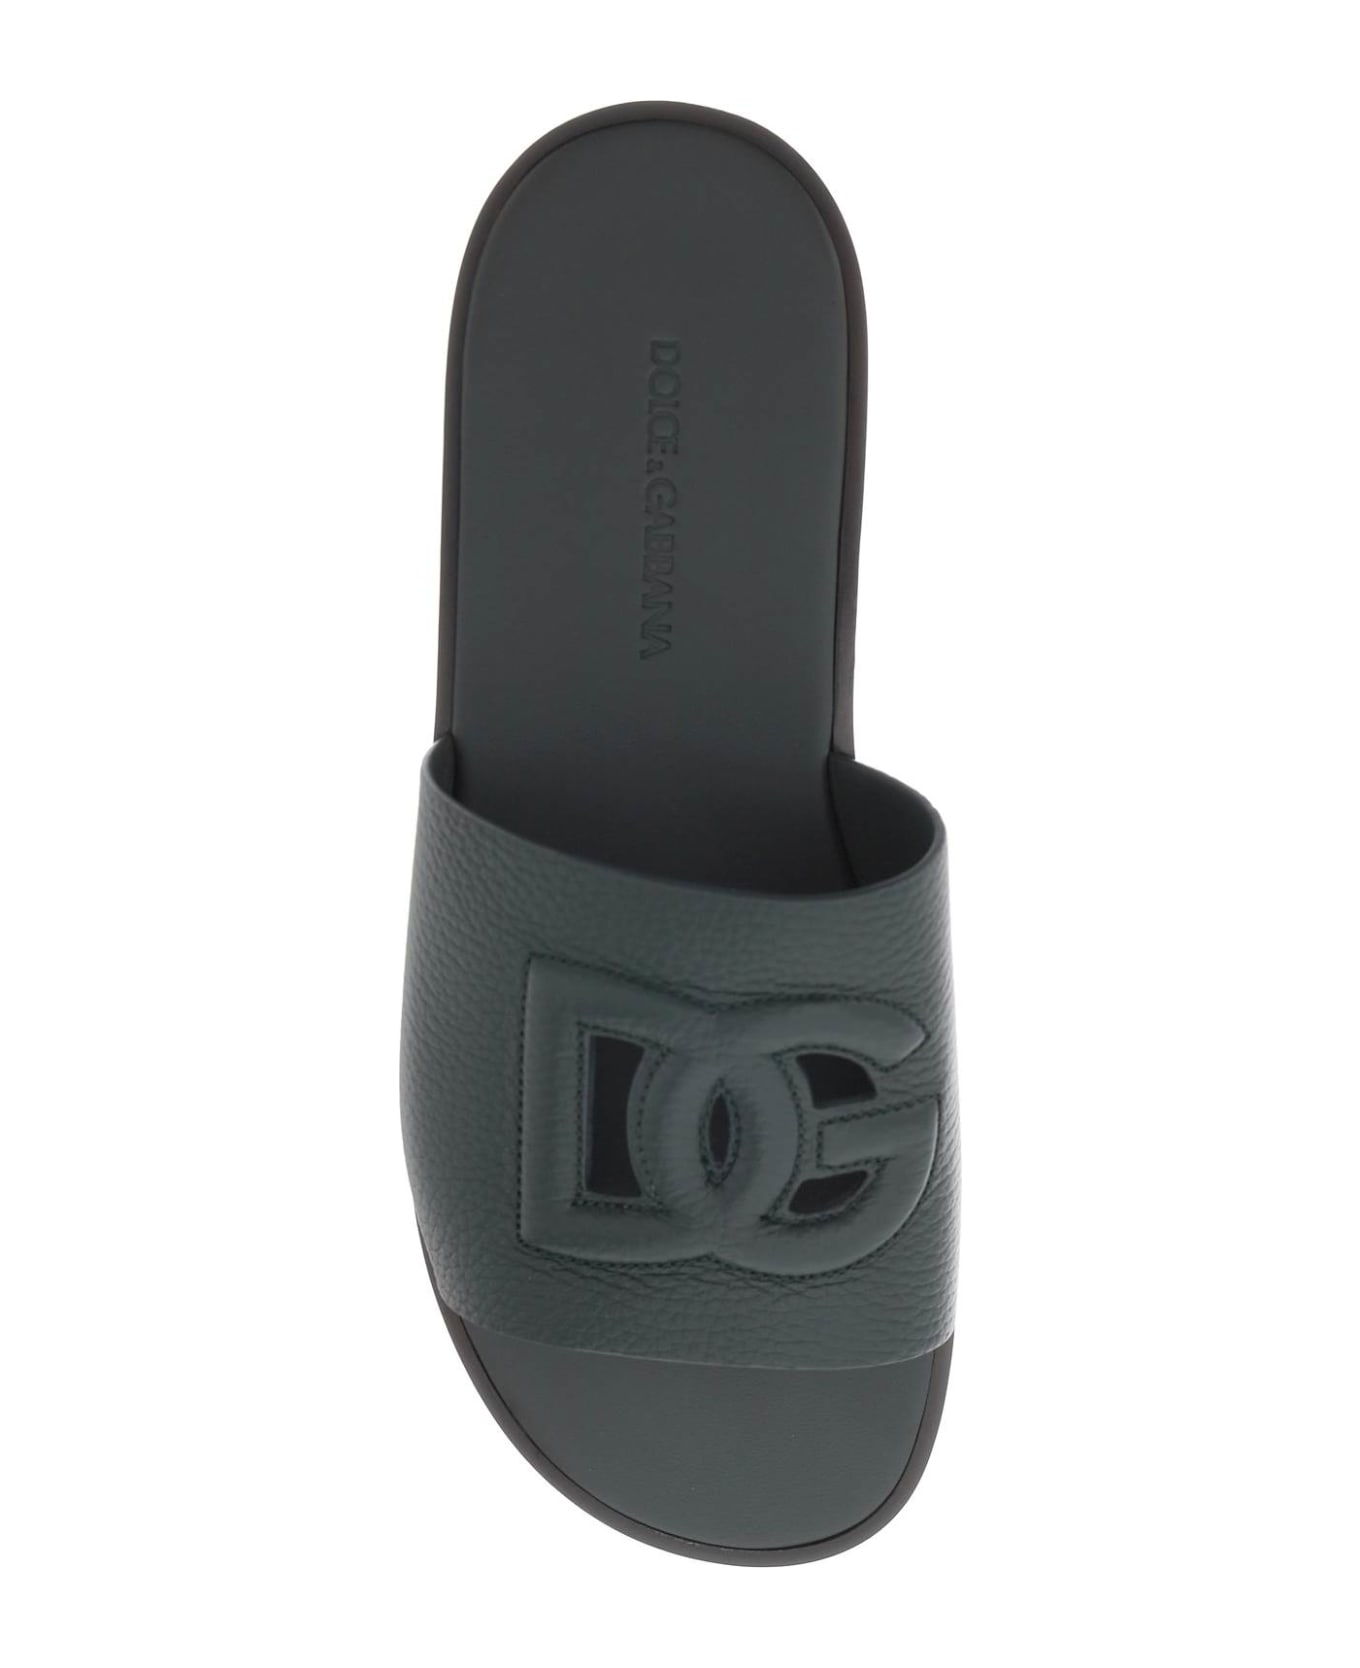 Dolce & Gabbana Cut-out Logo Leather Slides - VERDE SCURO 3 (Green)